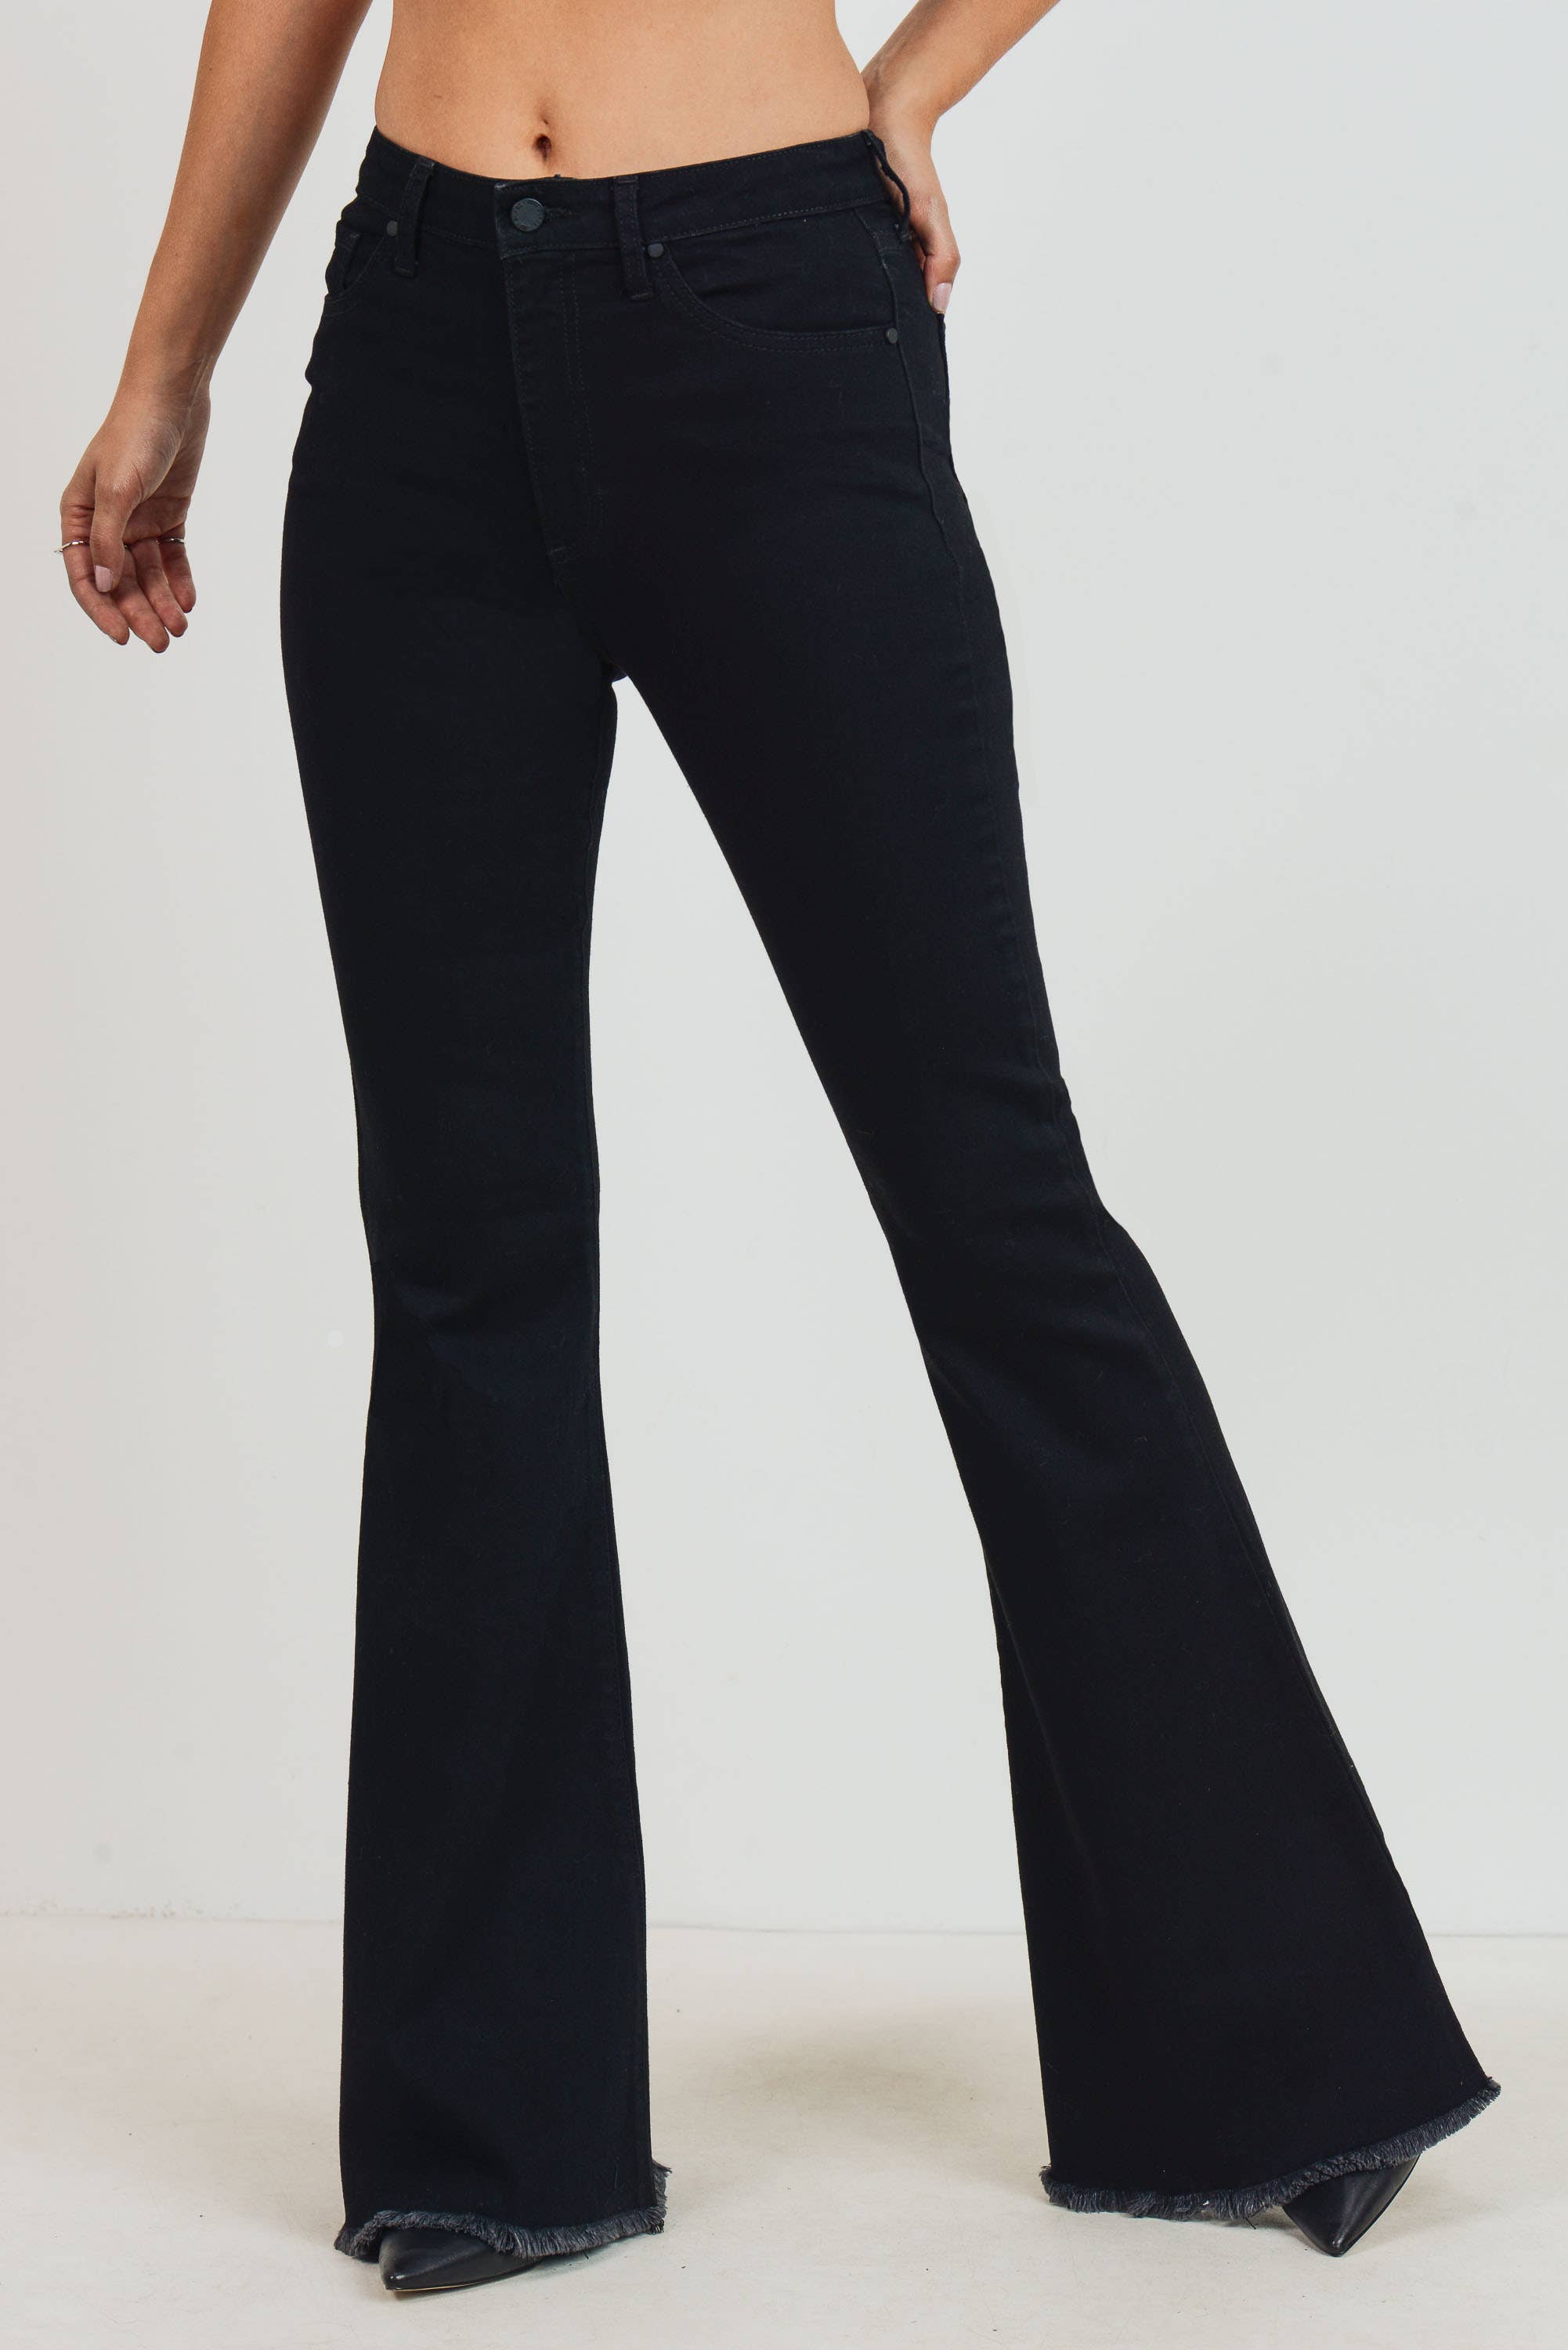 Lycra Ruffle Bell Bottoms | Omni-Collection